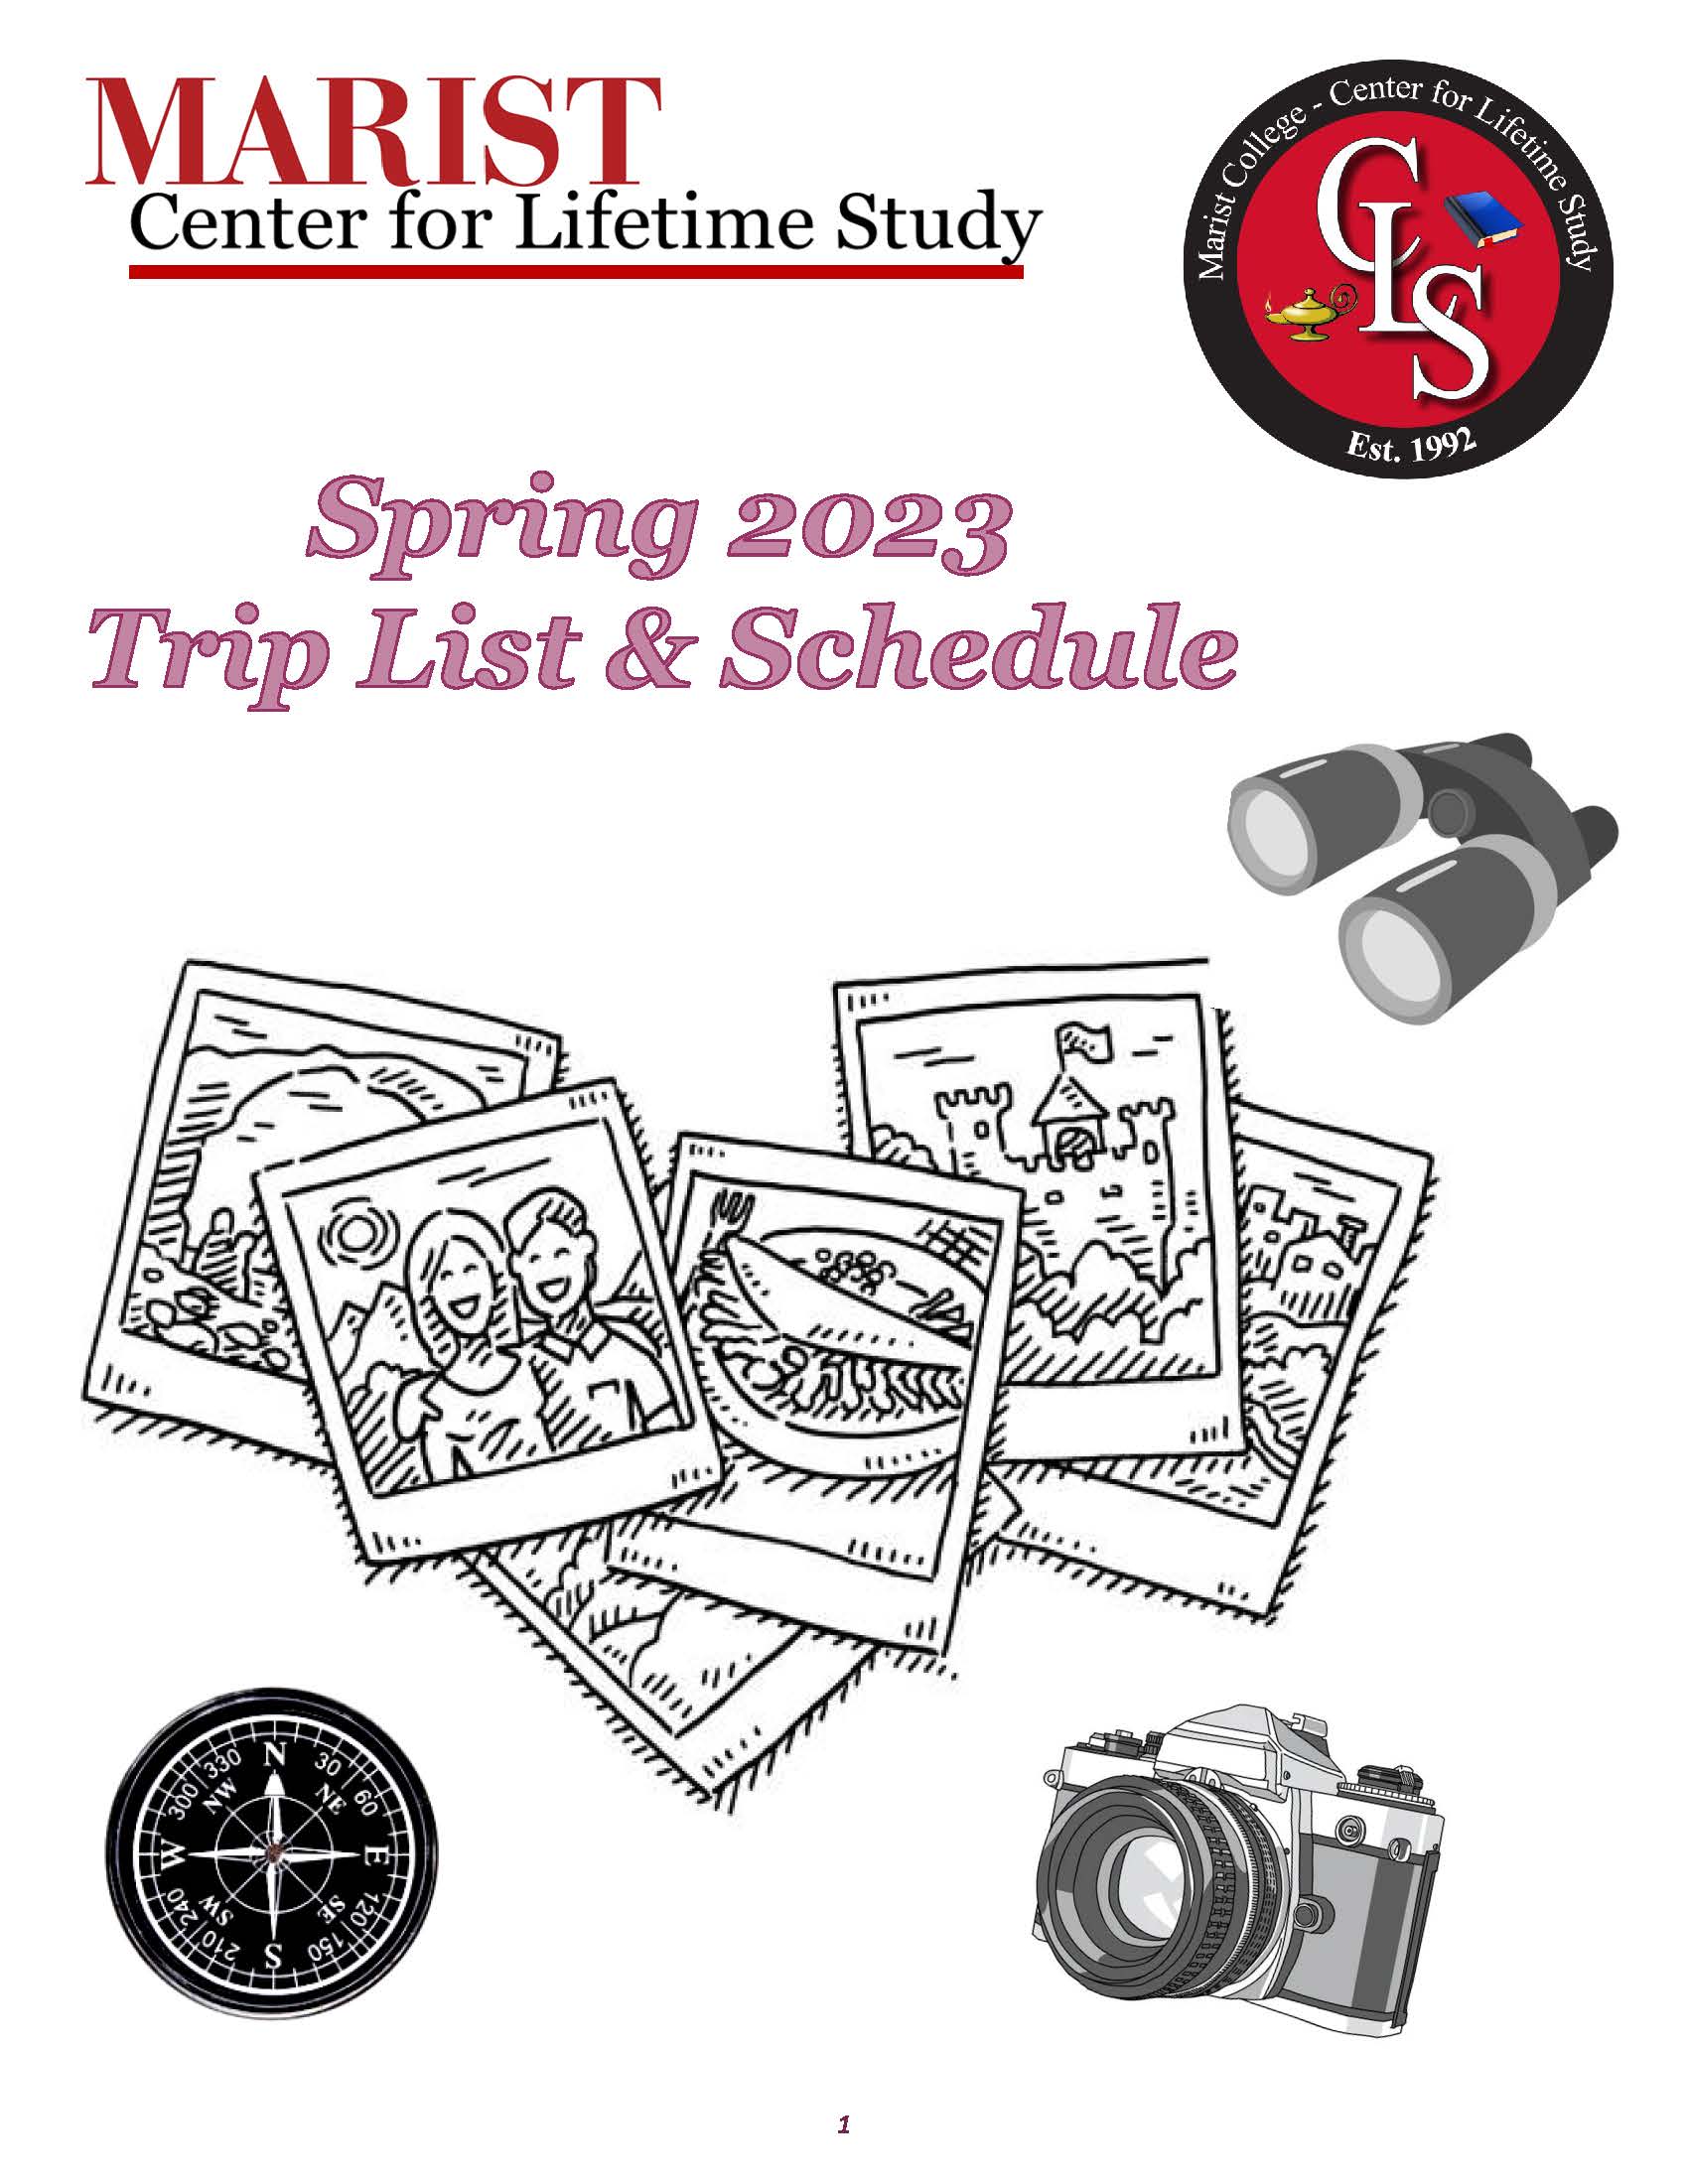 Image of the cover page for the CLS Trip List and Schedule